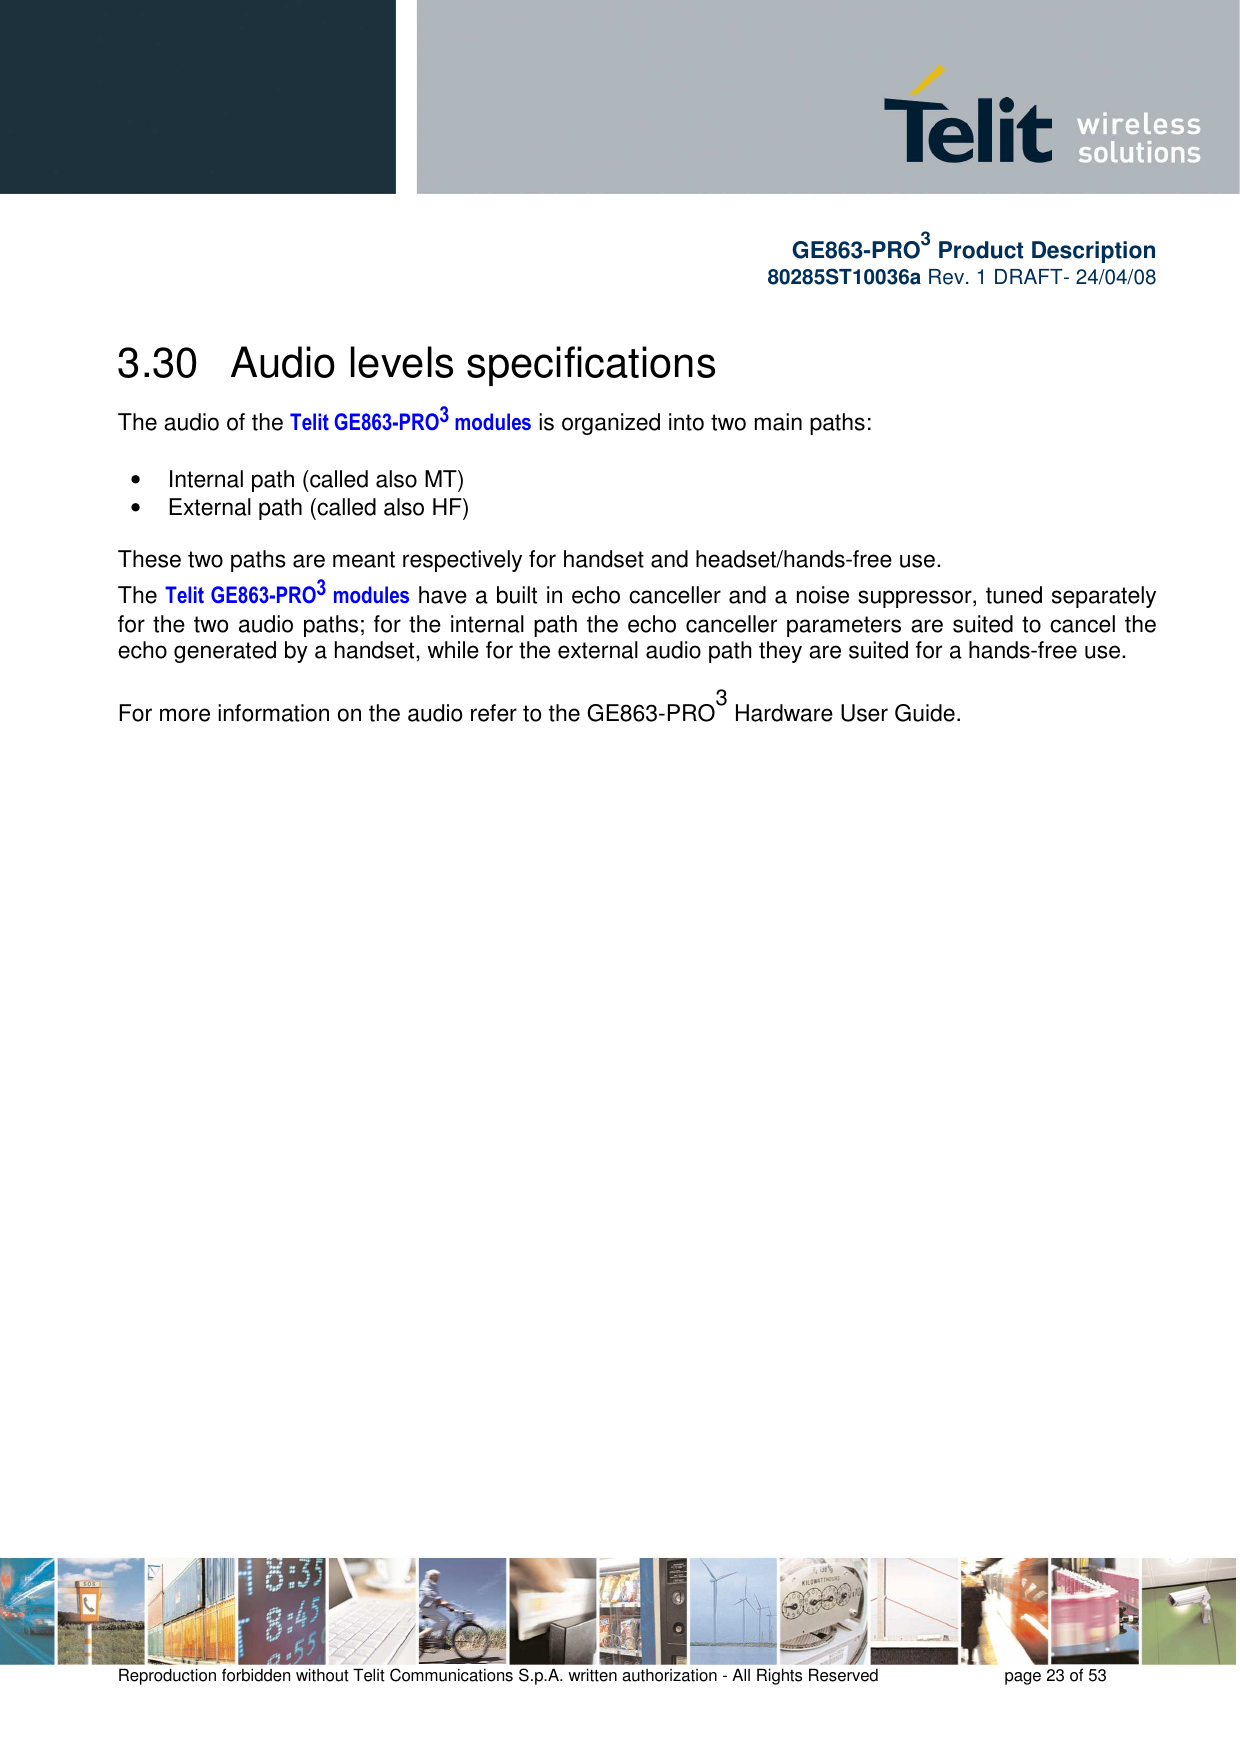       GE863-PRO3 Product Description 80285ST10036a Rev. 1 DRAFT- 24/04/08    Reproduction forbidden without Telit Communications S.p.A. written authorization - All Rights Reserved    page 23 of 53  3.30   Audio levels specifications The audio of the Telit GE863-PRO3 modules is organized into two main paths:   •  Internal path (called also MT) •  External path (called also HF)  These two paths are meant respectively for handset and headset/hands-free use. The Telit GE863-PRO3 modules have a built in echo canceller and a noise suppressor, tuned separately for the two audio paths; for the internal path the echo canceller parameters are suited to cancel the echo generated by a handset, while for the external audio path they are suited for a hands-free use.  For more information on the audio refer to the GE863-PRO3 Hardware User Guide. 